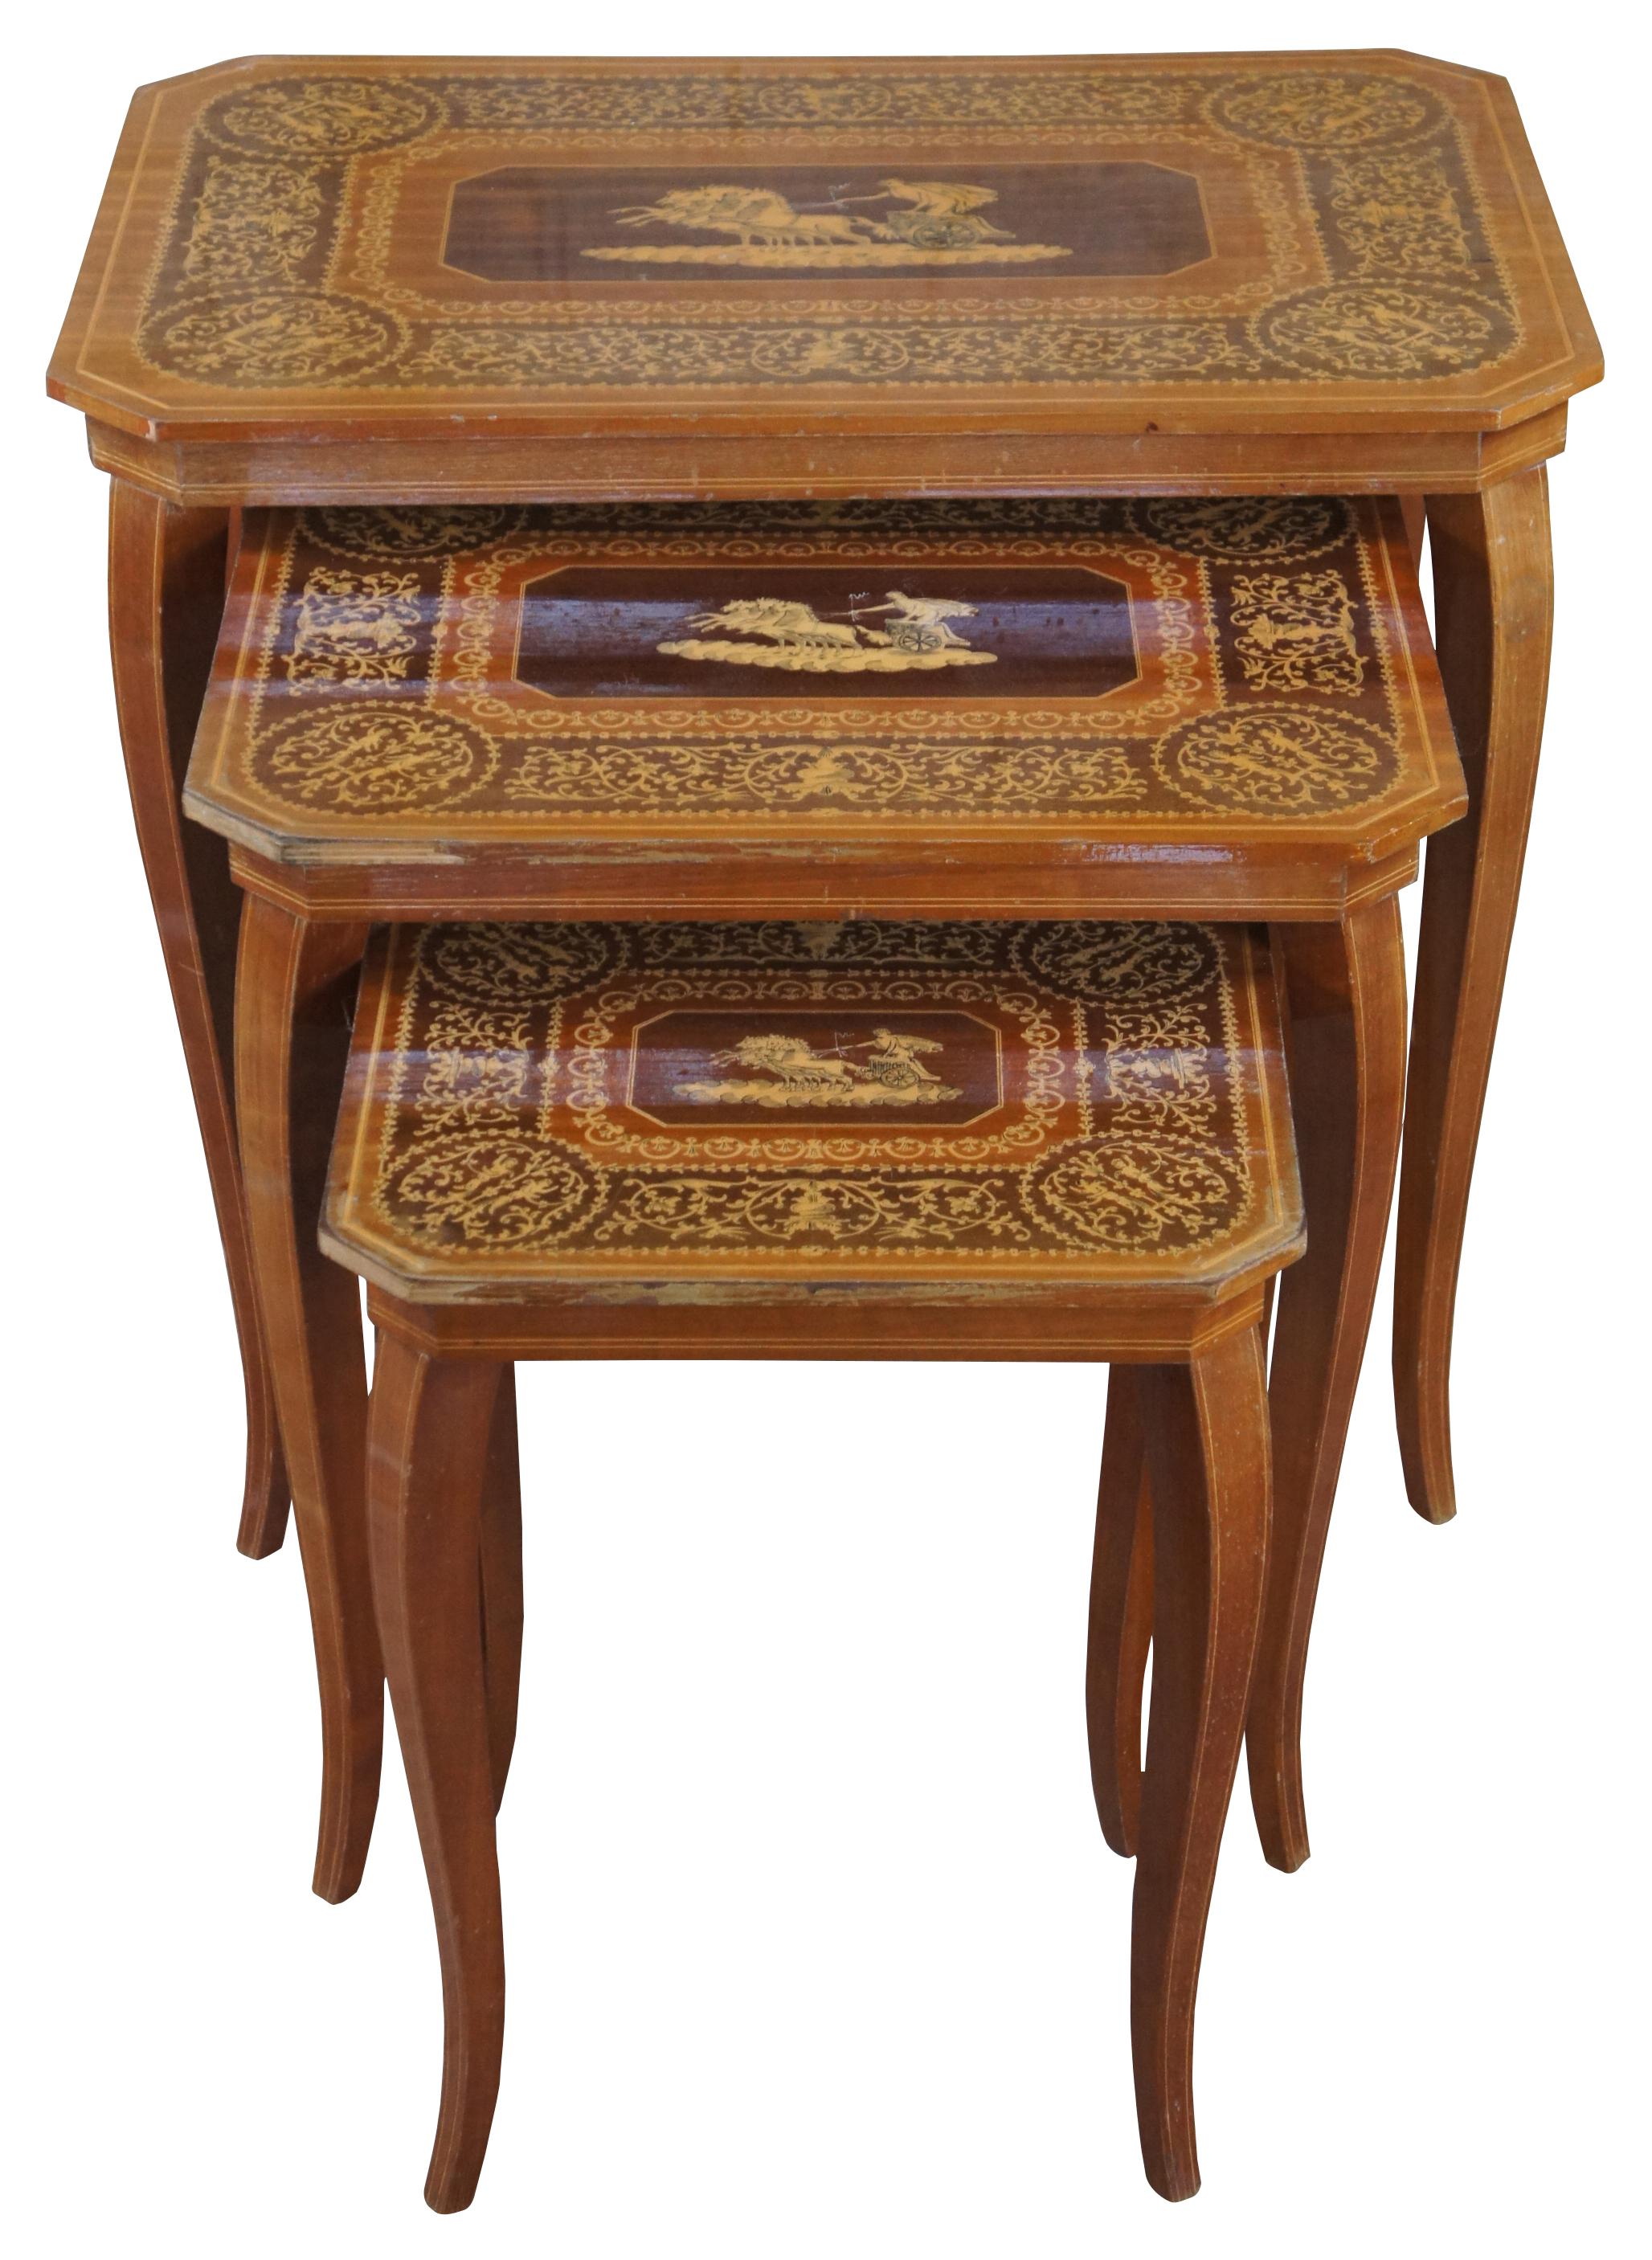 Three vintage Italian Neoclassical nesting tables featuring rectangular form with central scene composed of a four horse drawn chariot and ornate banding with cherubs, trophy urns and floral motifs.

Measures: 18.5